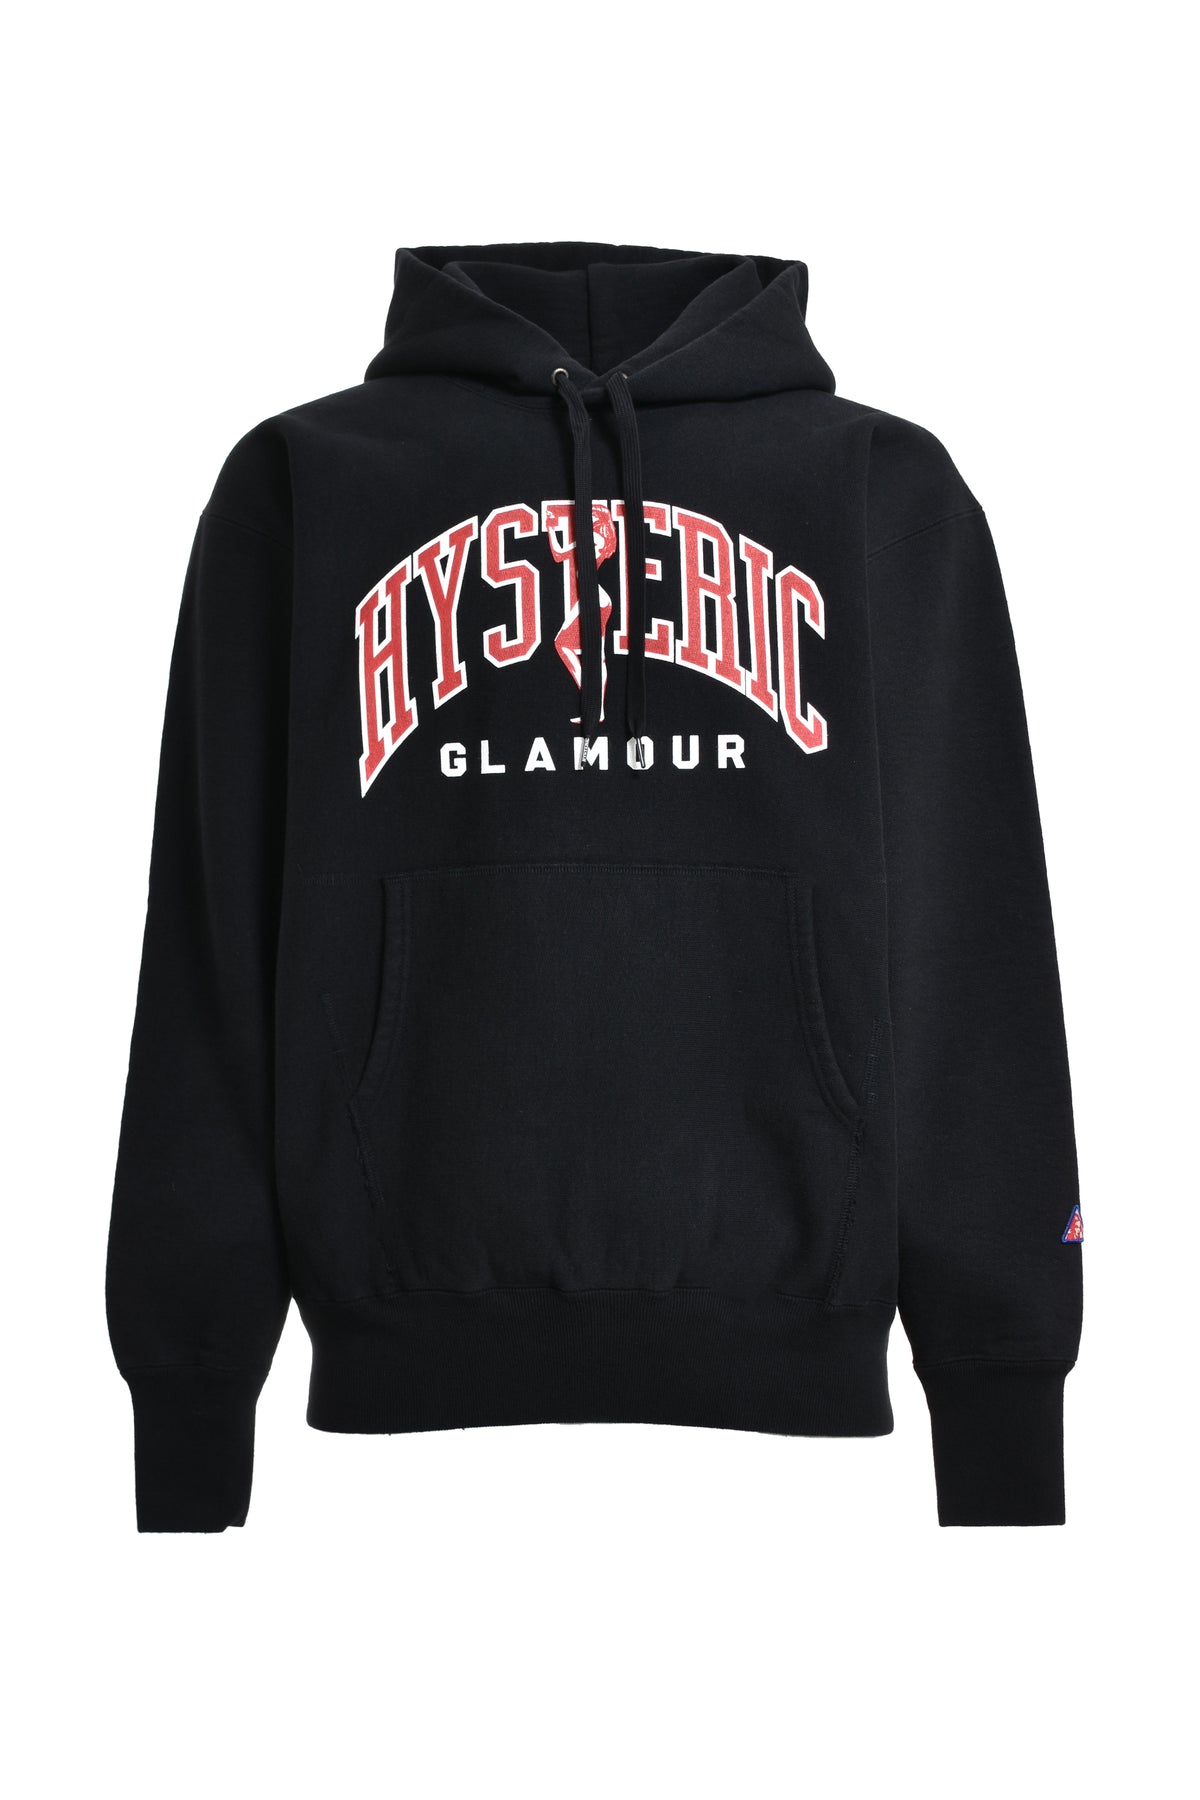 HYSTERIC GLAMOUR (ヒステリックグラマー) | NUBIAN TOKYO 通販